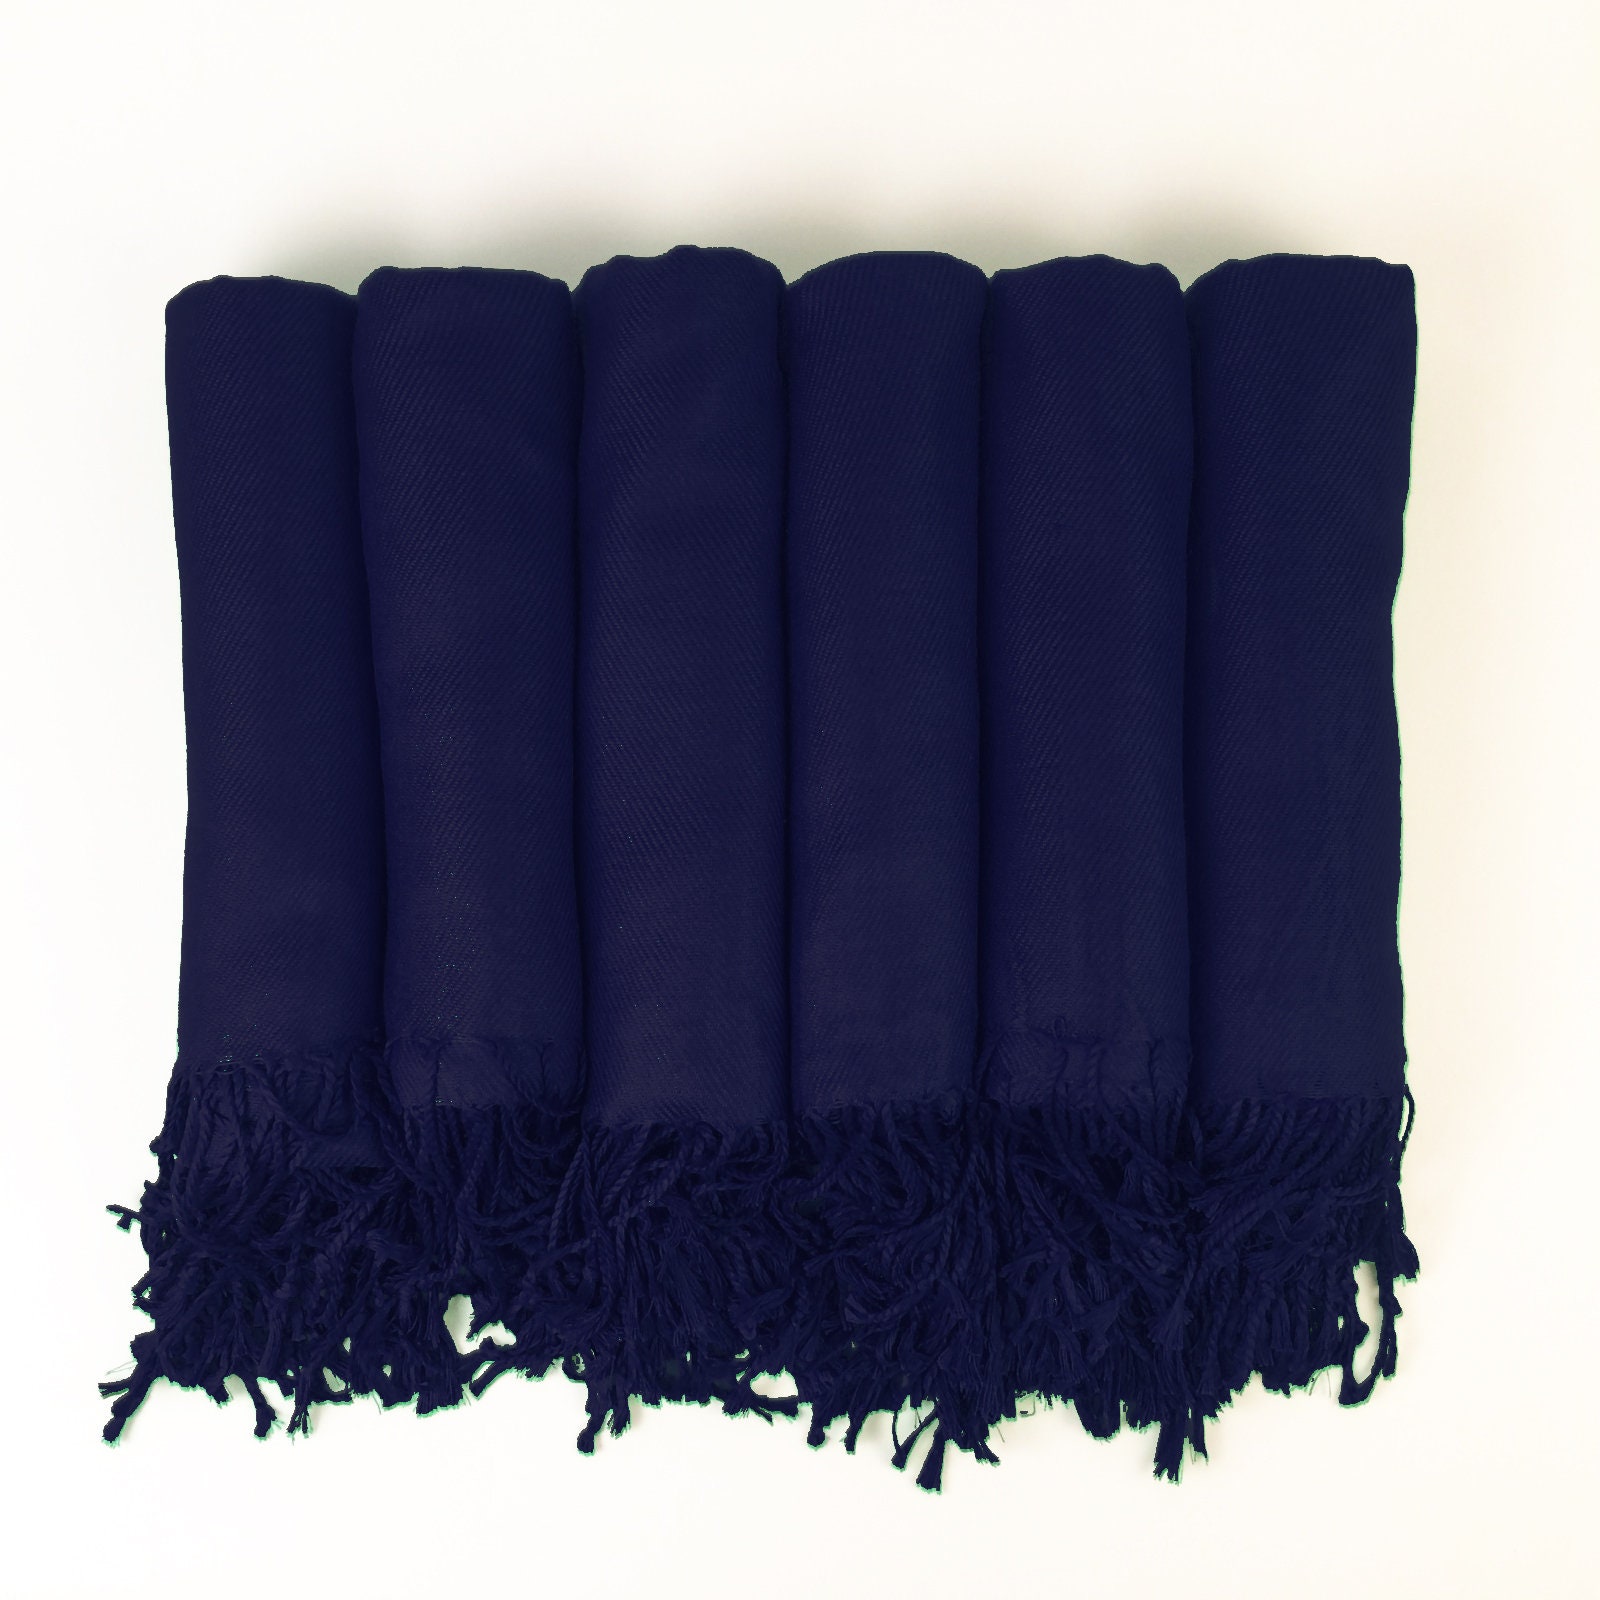 Set Of 2, 3, 4, 5, 6, 7, 8, 9 Or 10 Pashmina Shawls in Navy Blue - Bridesmaid Gift, Wedding Favor Monogrammable